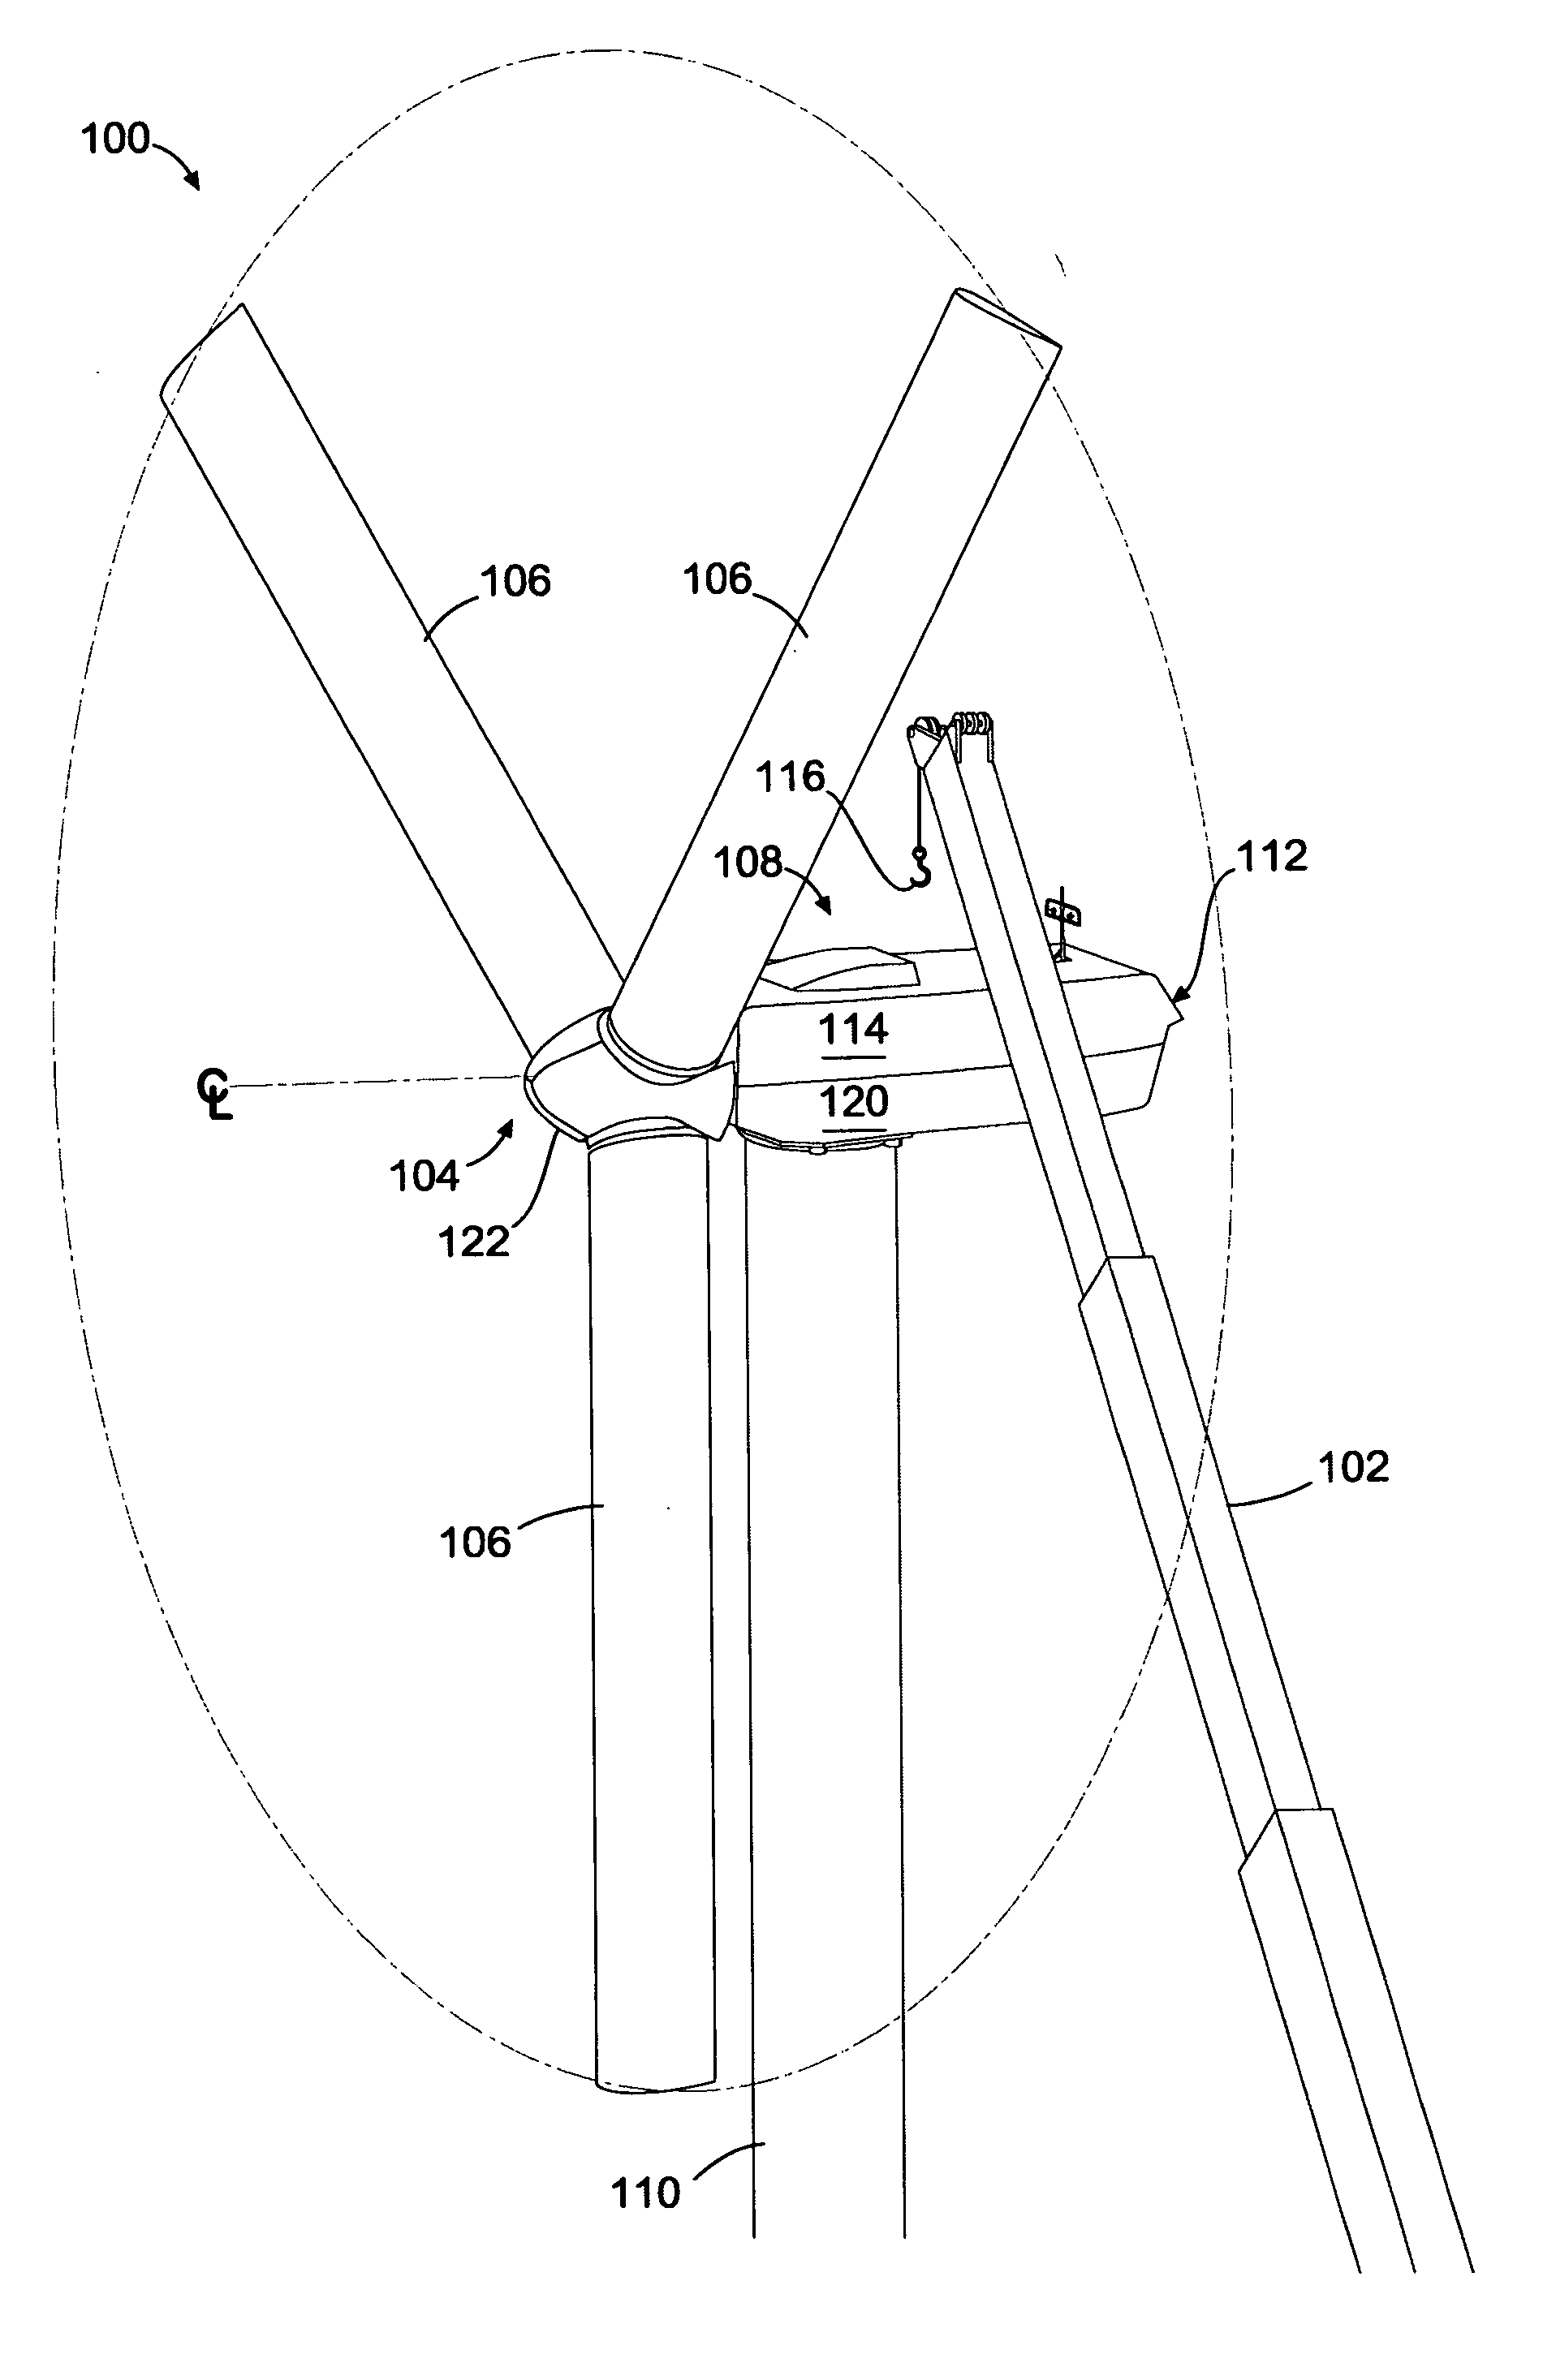 Methods and apparatus for replacing objects on horizontal shafts in elevated locations